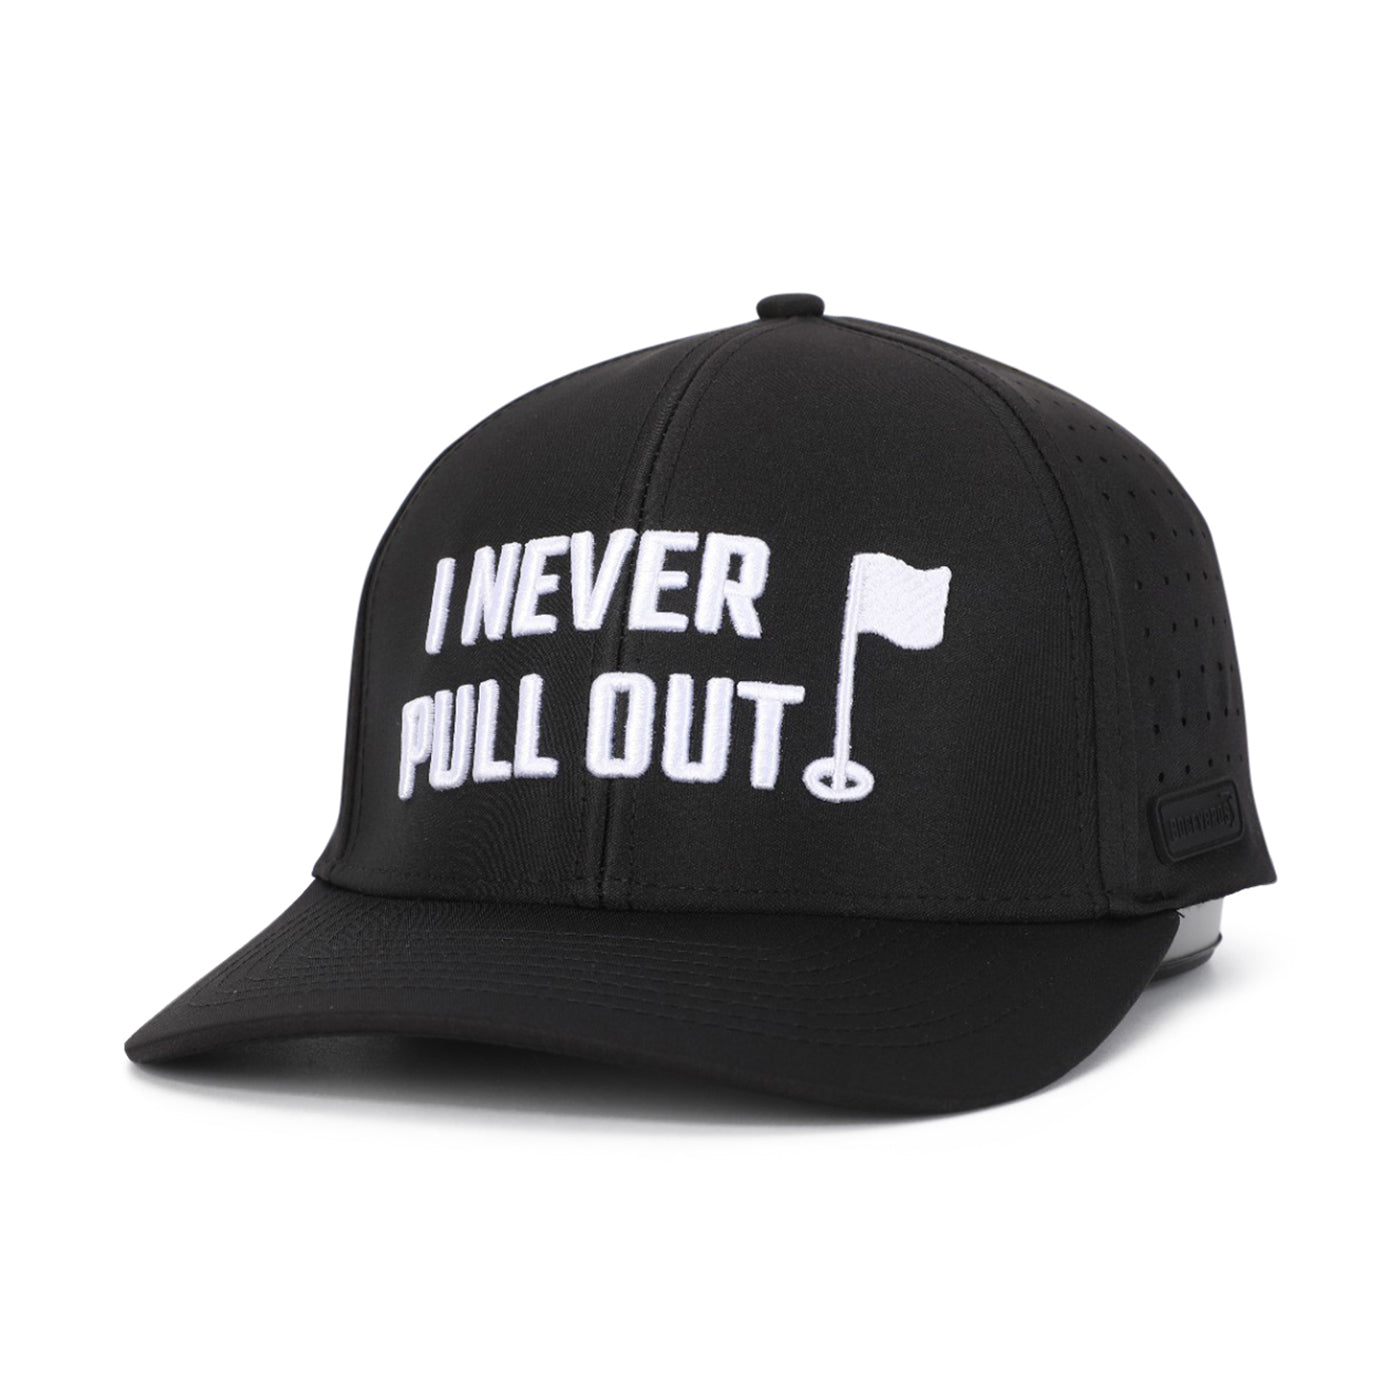 I Never Pull Out - Performance Golf Hat - Fitted